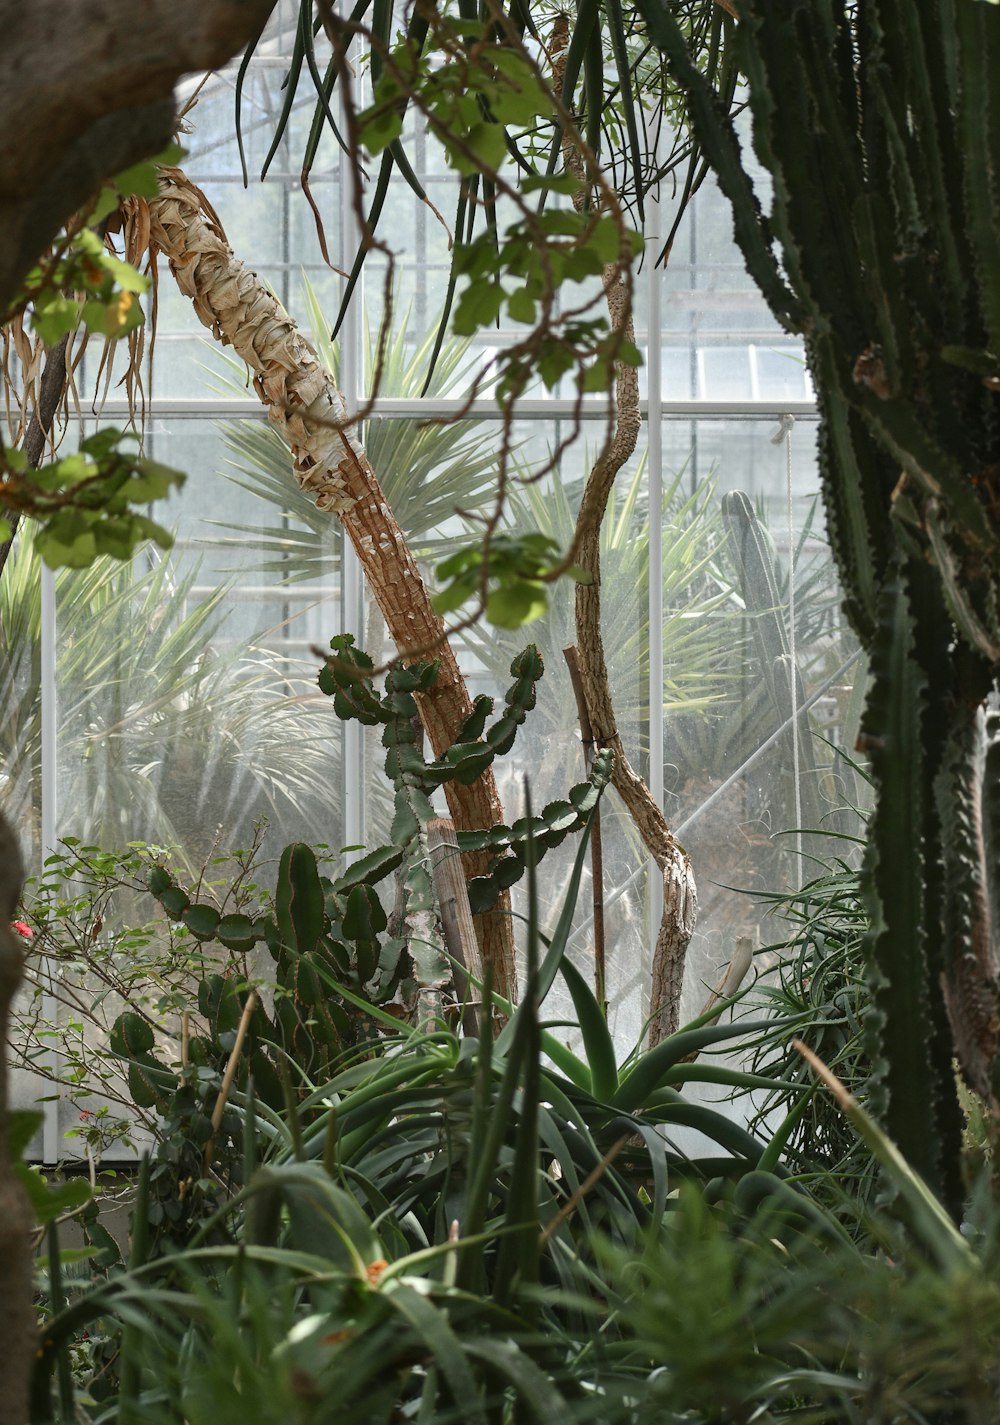 a view of the inside of a greenhouse through the plants